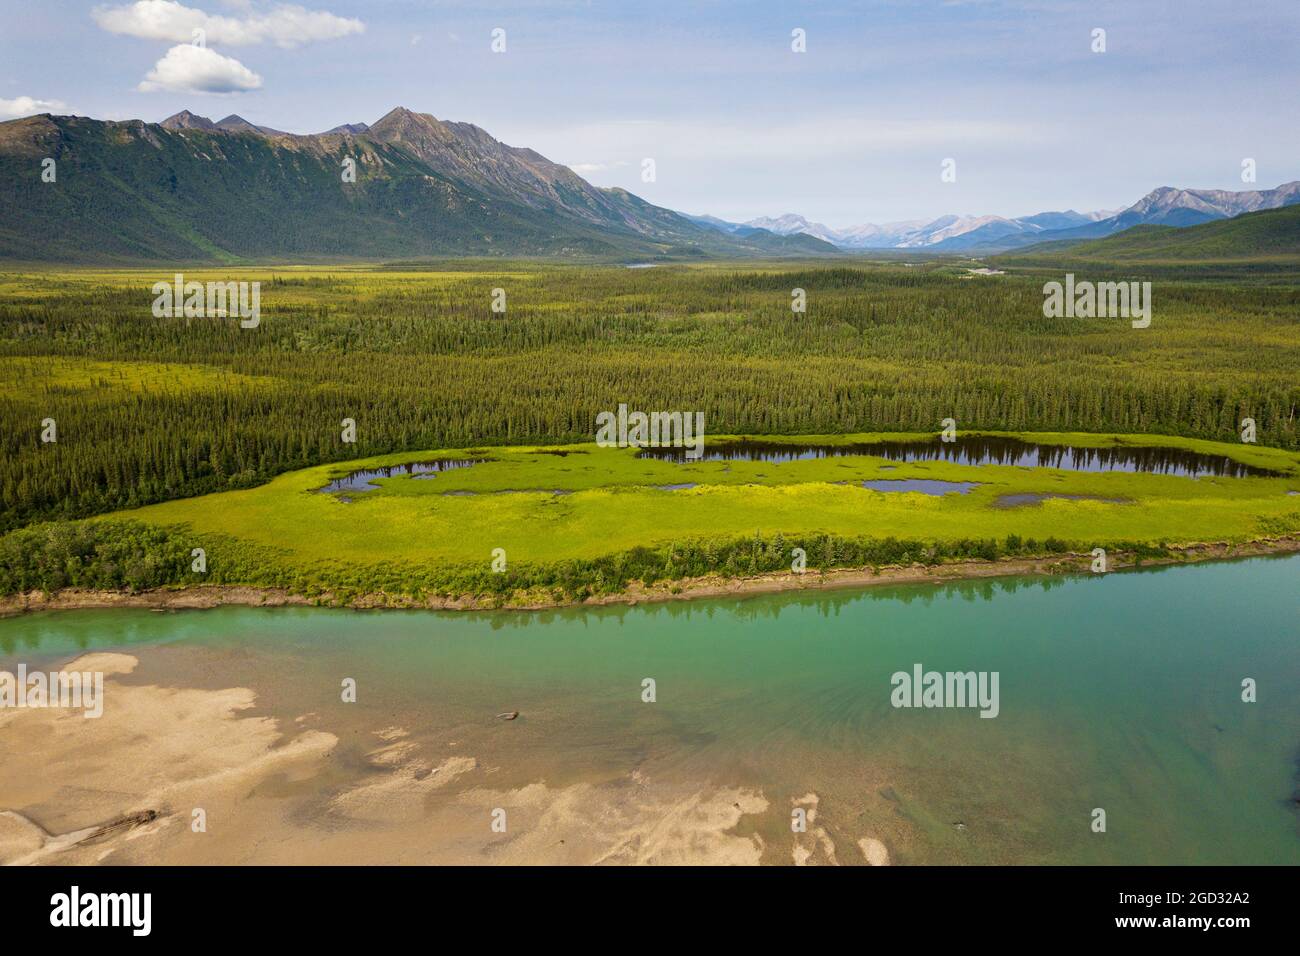 View of the John River looking north toward the southernmost portion of the remote Brooks Mountain Range north of the Arctic Circle in Alaska just sou Stock Photo